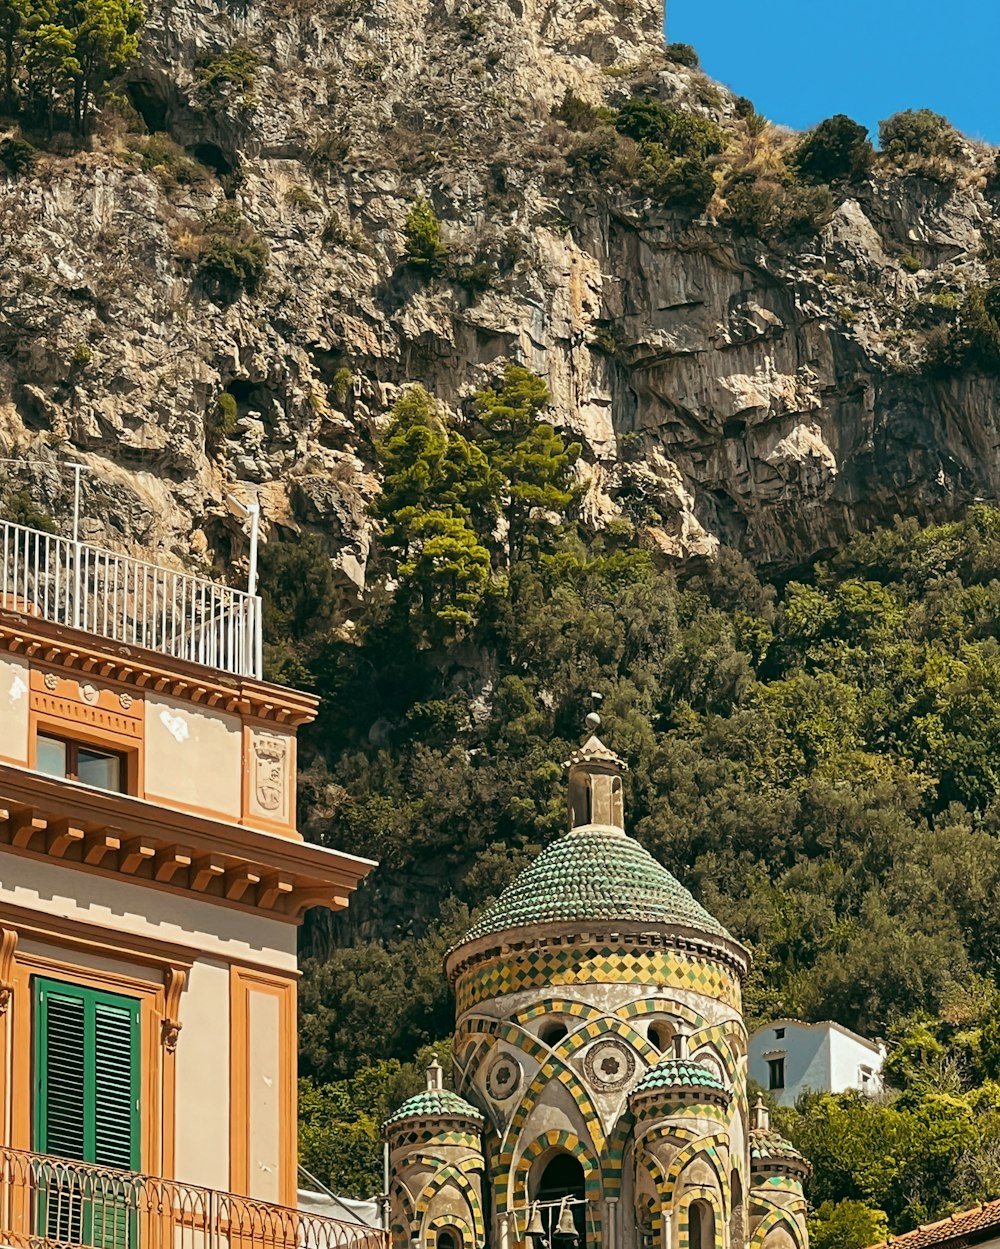 a building in front of a mountain with a clock on it